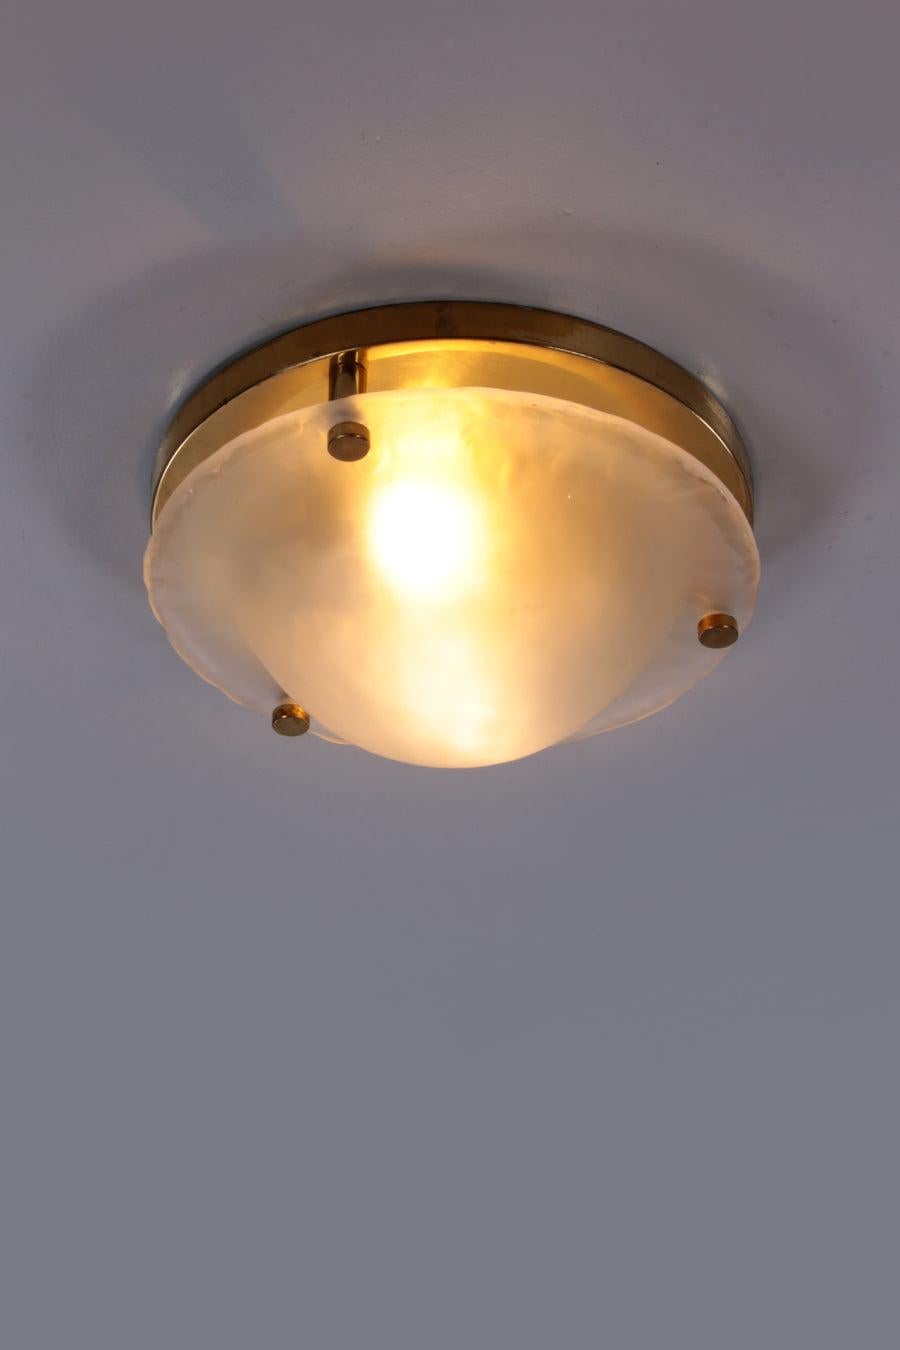 Vintage Matte Glass Ceiling Lamp by Fischer Leuchten

This is a beautiful ceiling lamp, with a brass mounting plate and brass buttons.

The glass plate is of nice thick quality and easy to attach.

Additional information:
Dimensions: 40 W x 40 D x